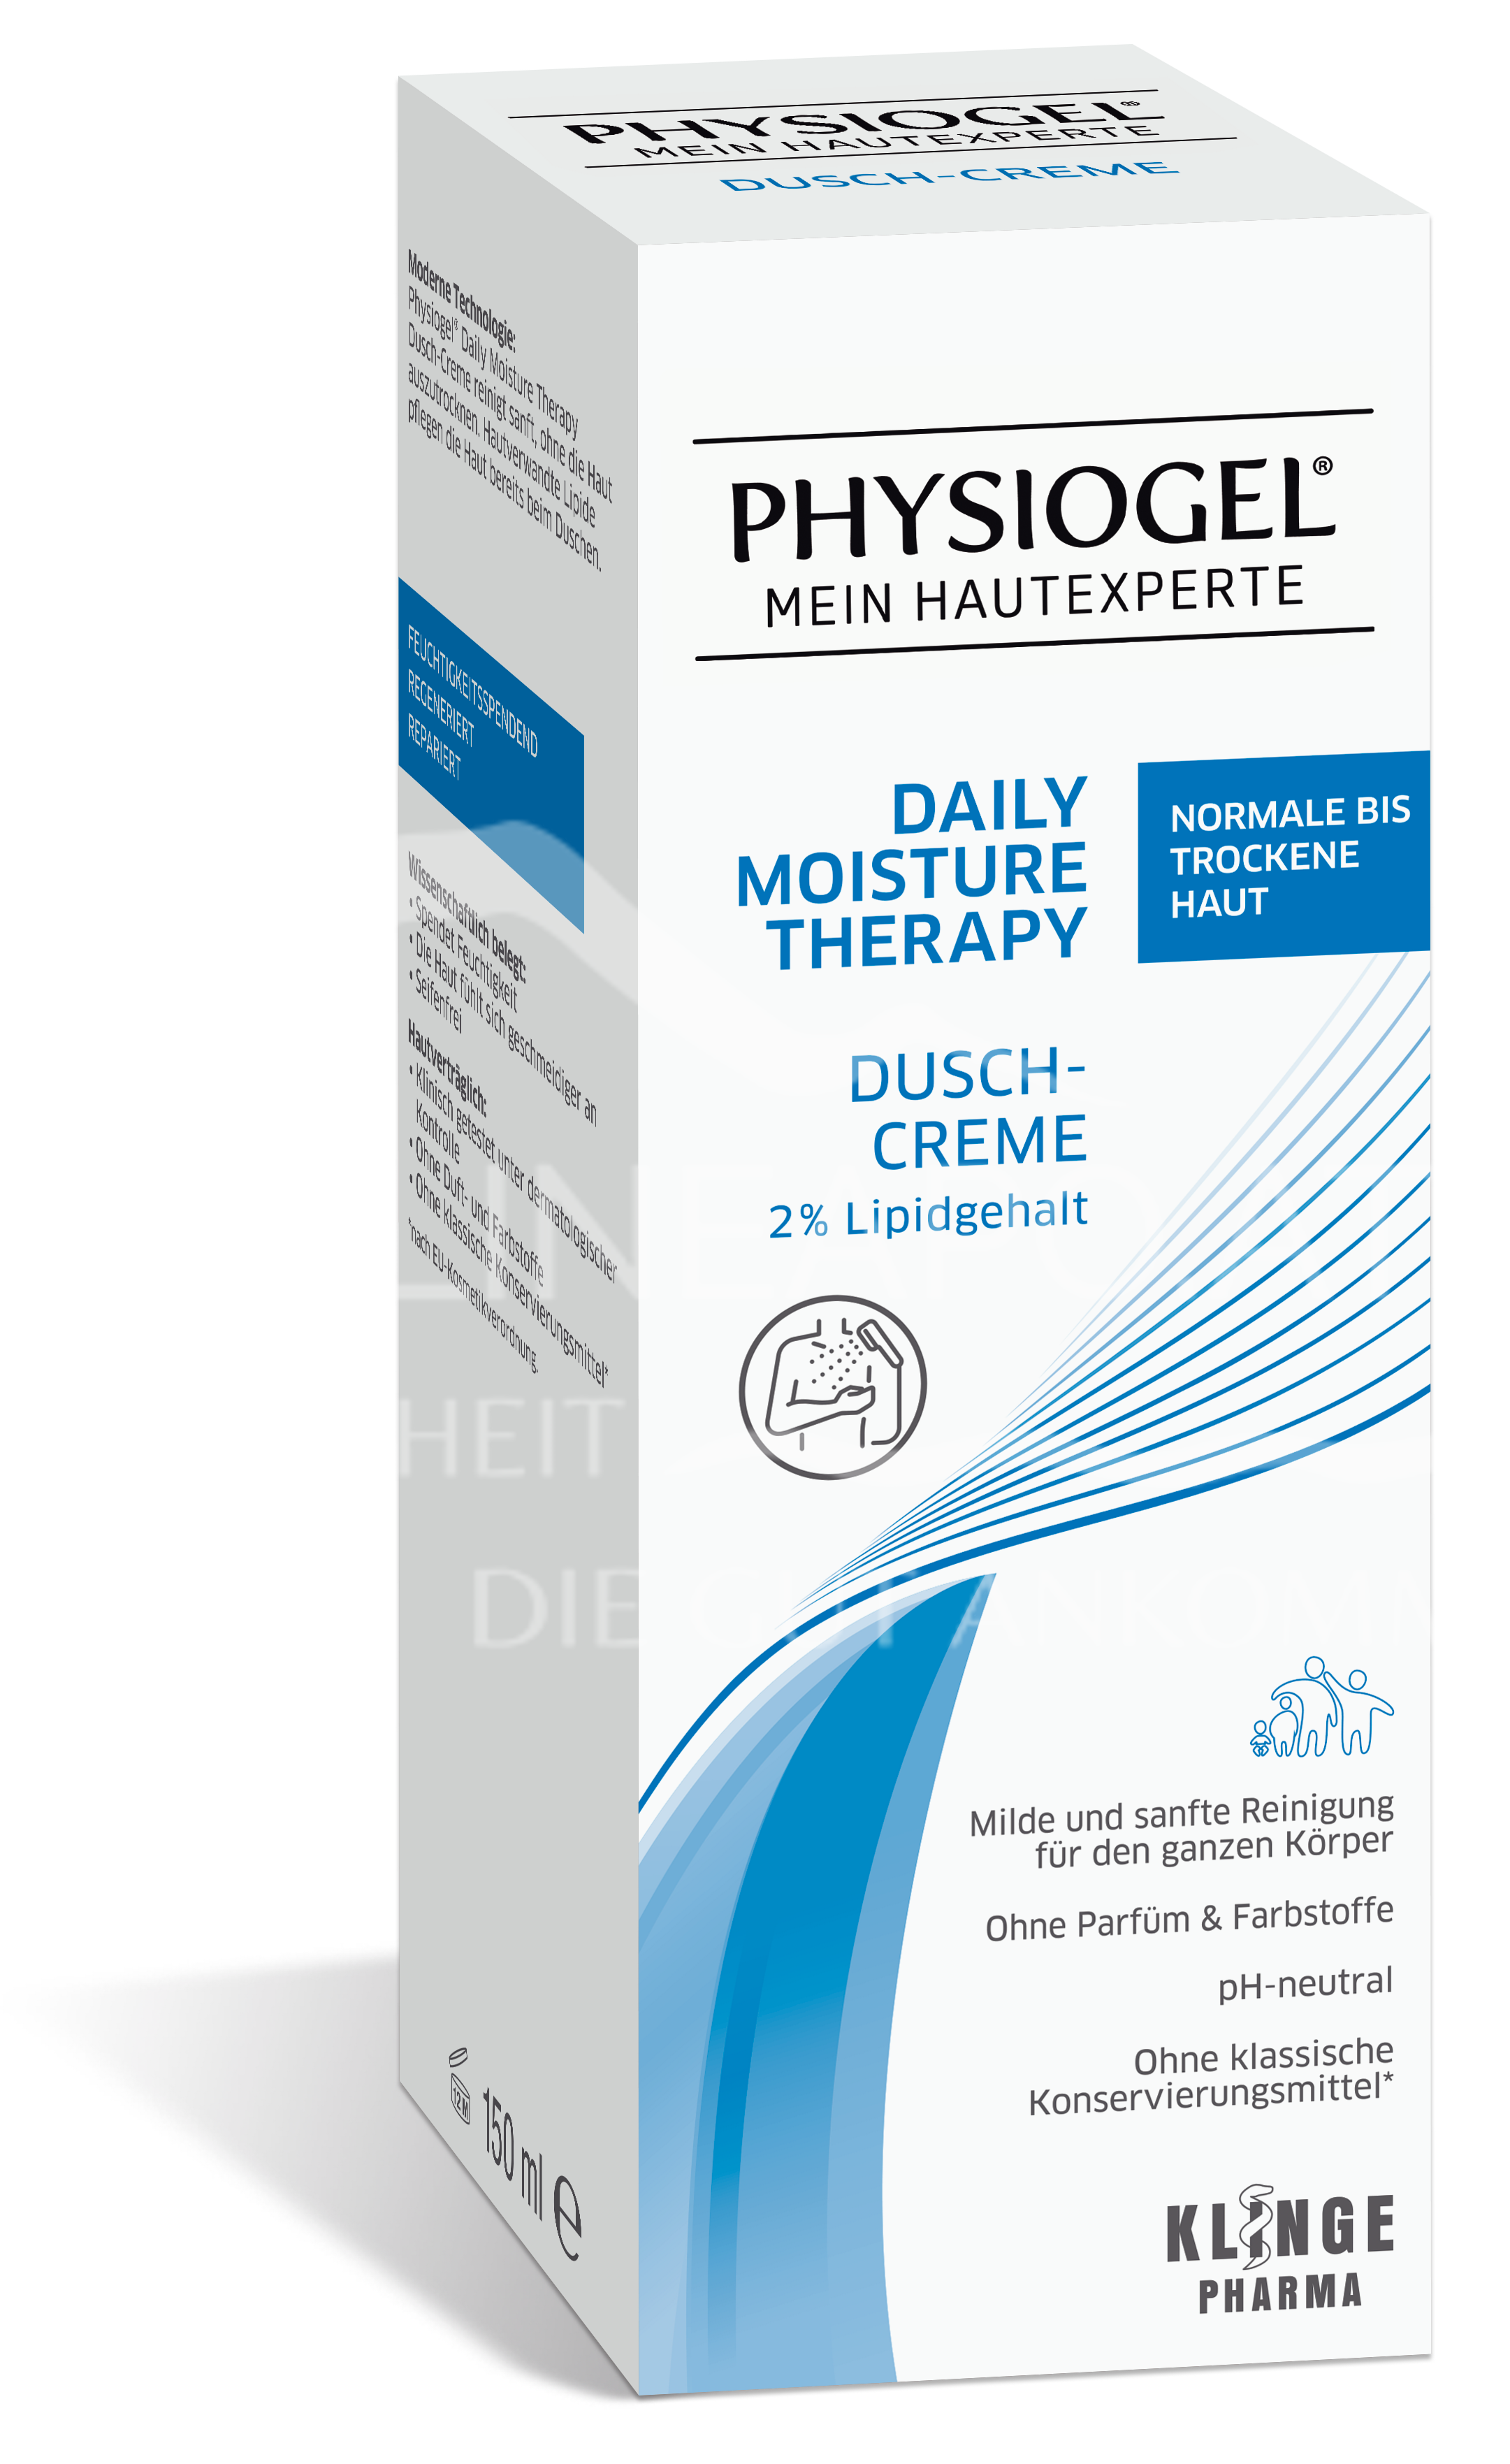 Physiogel® Daily Moisture Therapy Dusch-Creme - Normale bis trockene Haut